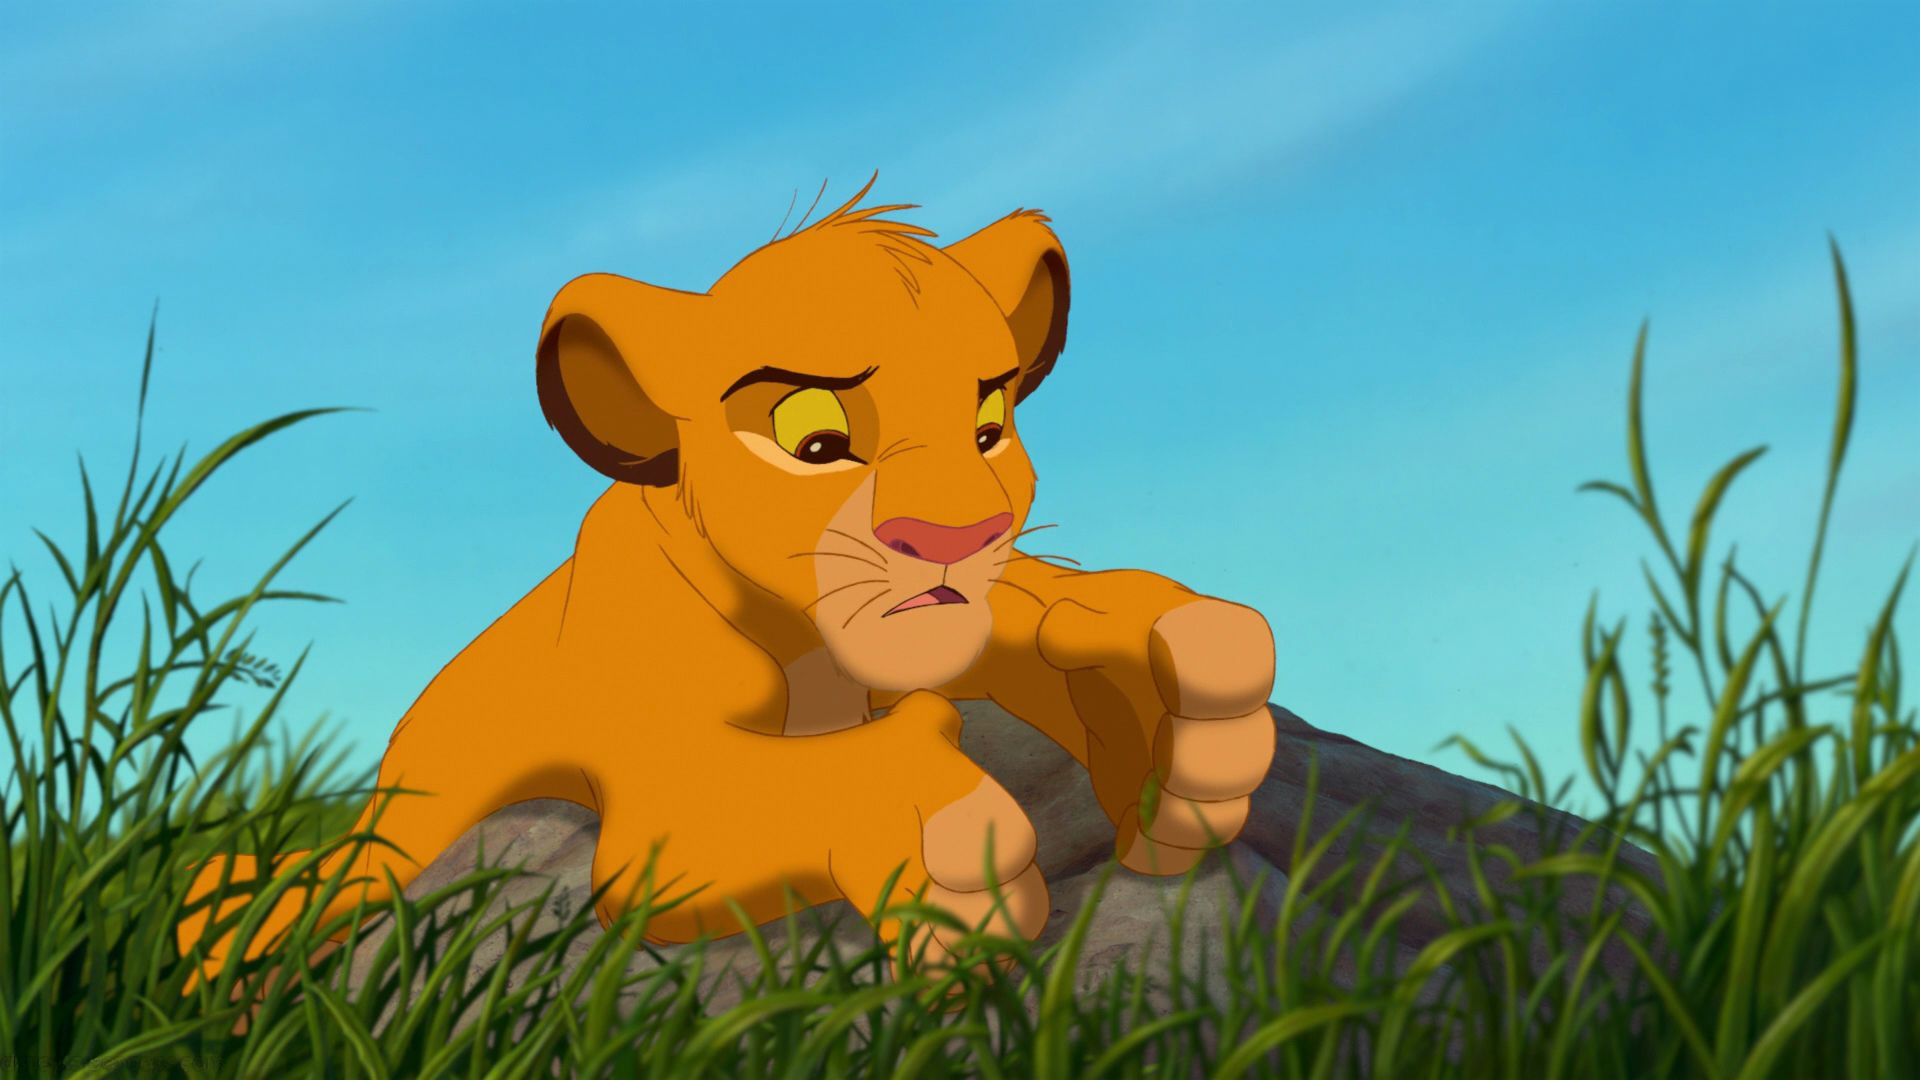 The Lion King Cartoon Adventures Of The Young Lion Simba Wallpaper HD 1920x1080, Wallpaper13.com